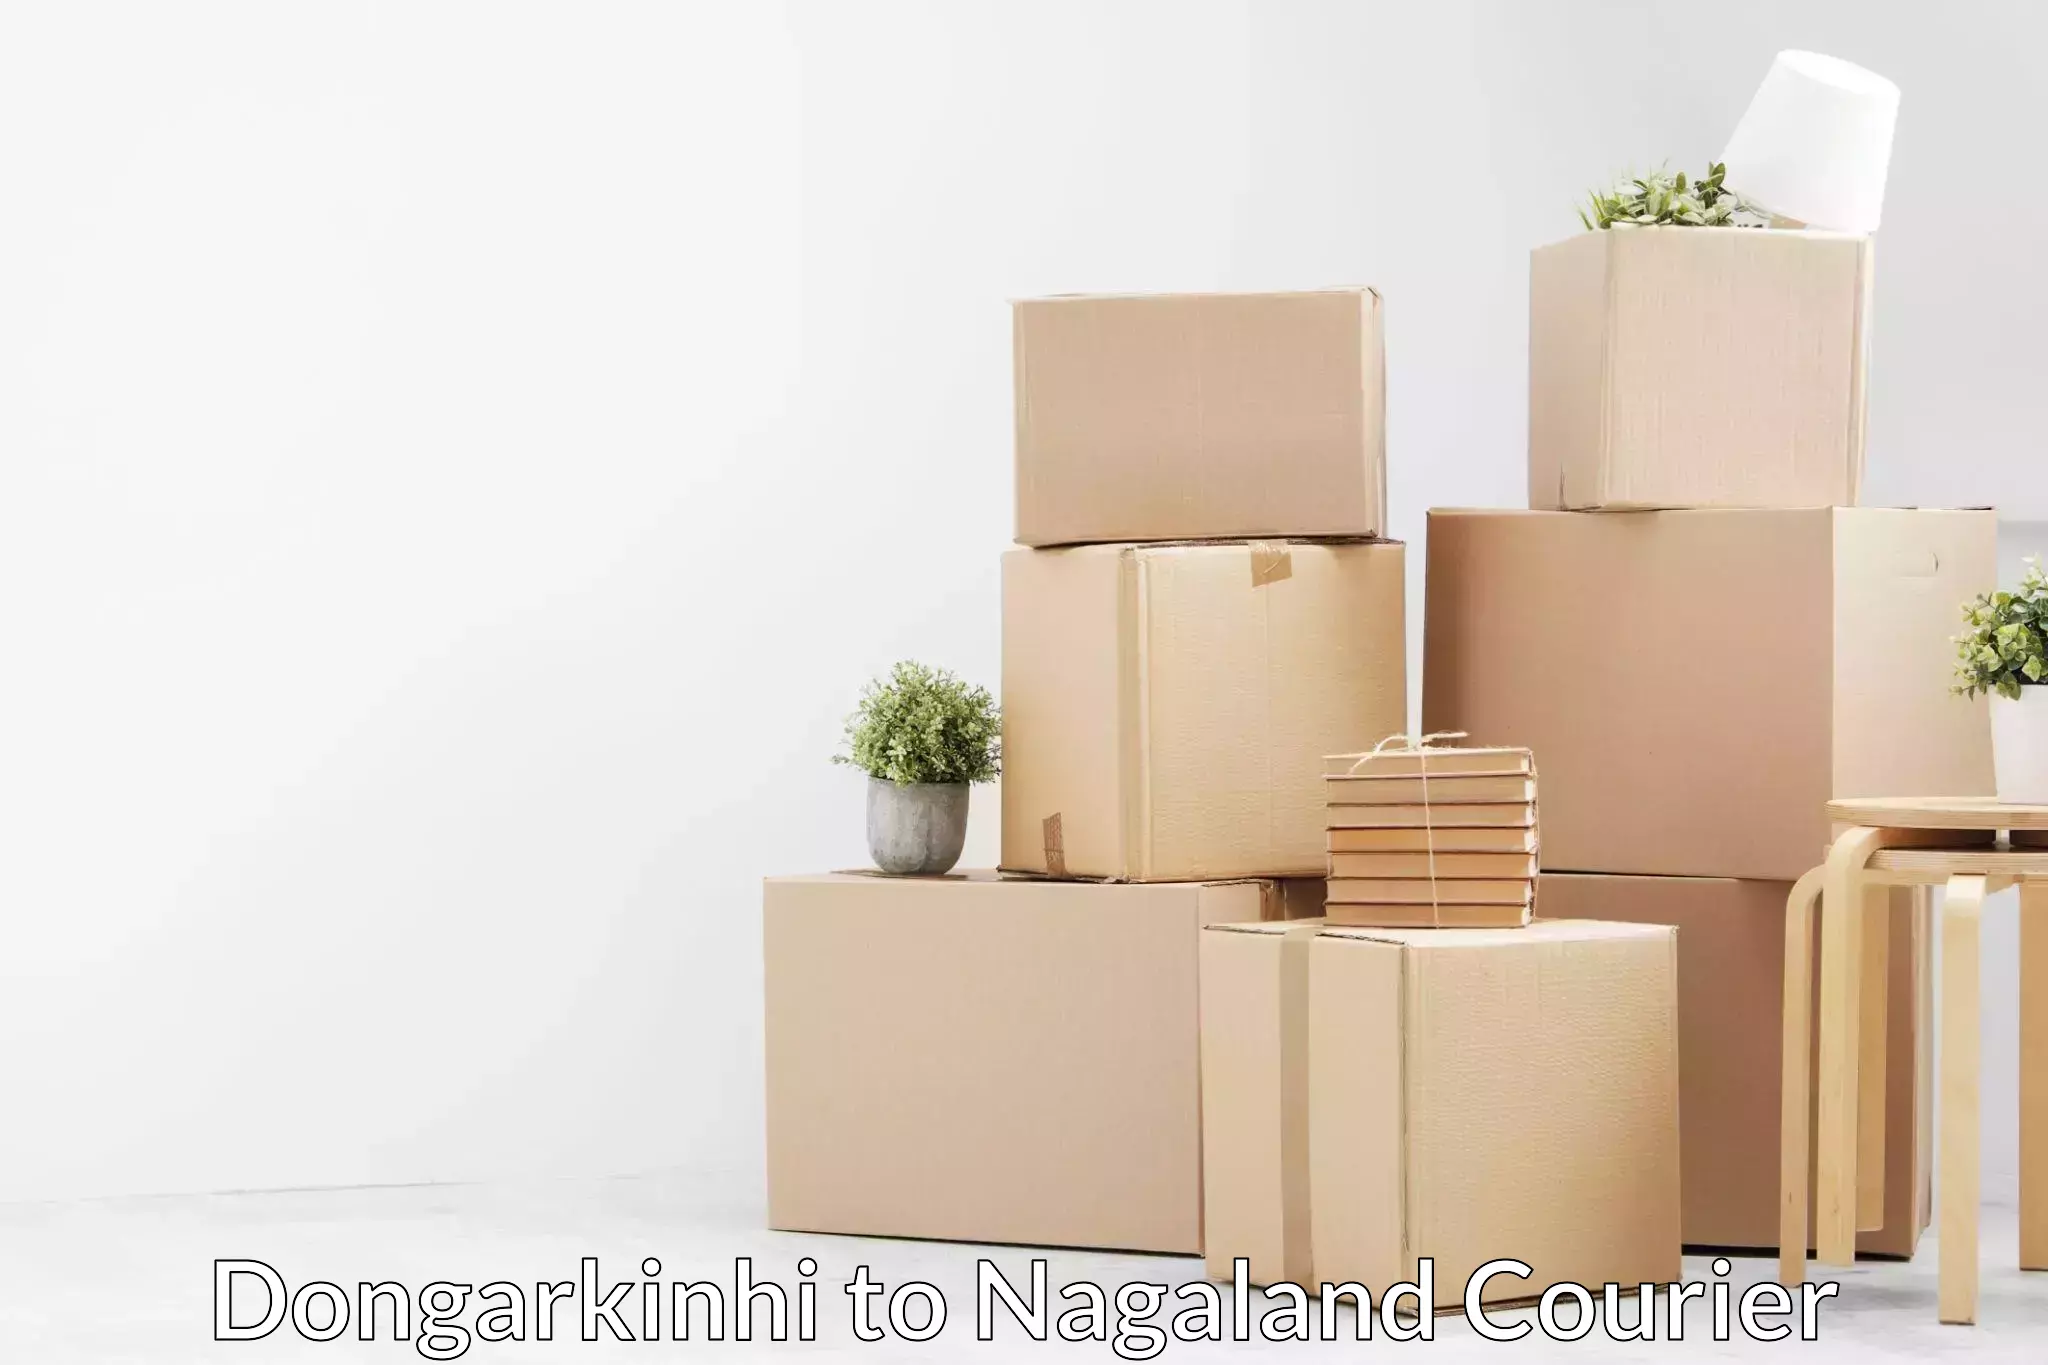 Professional moving assistance Dongarkinhi to Nagaland